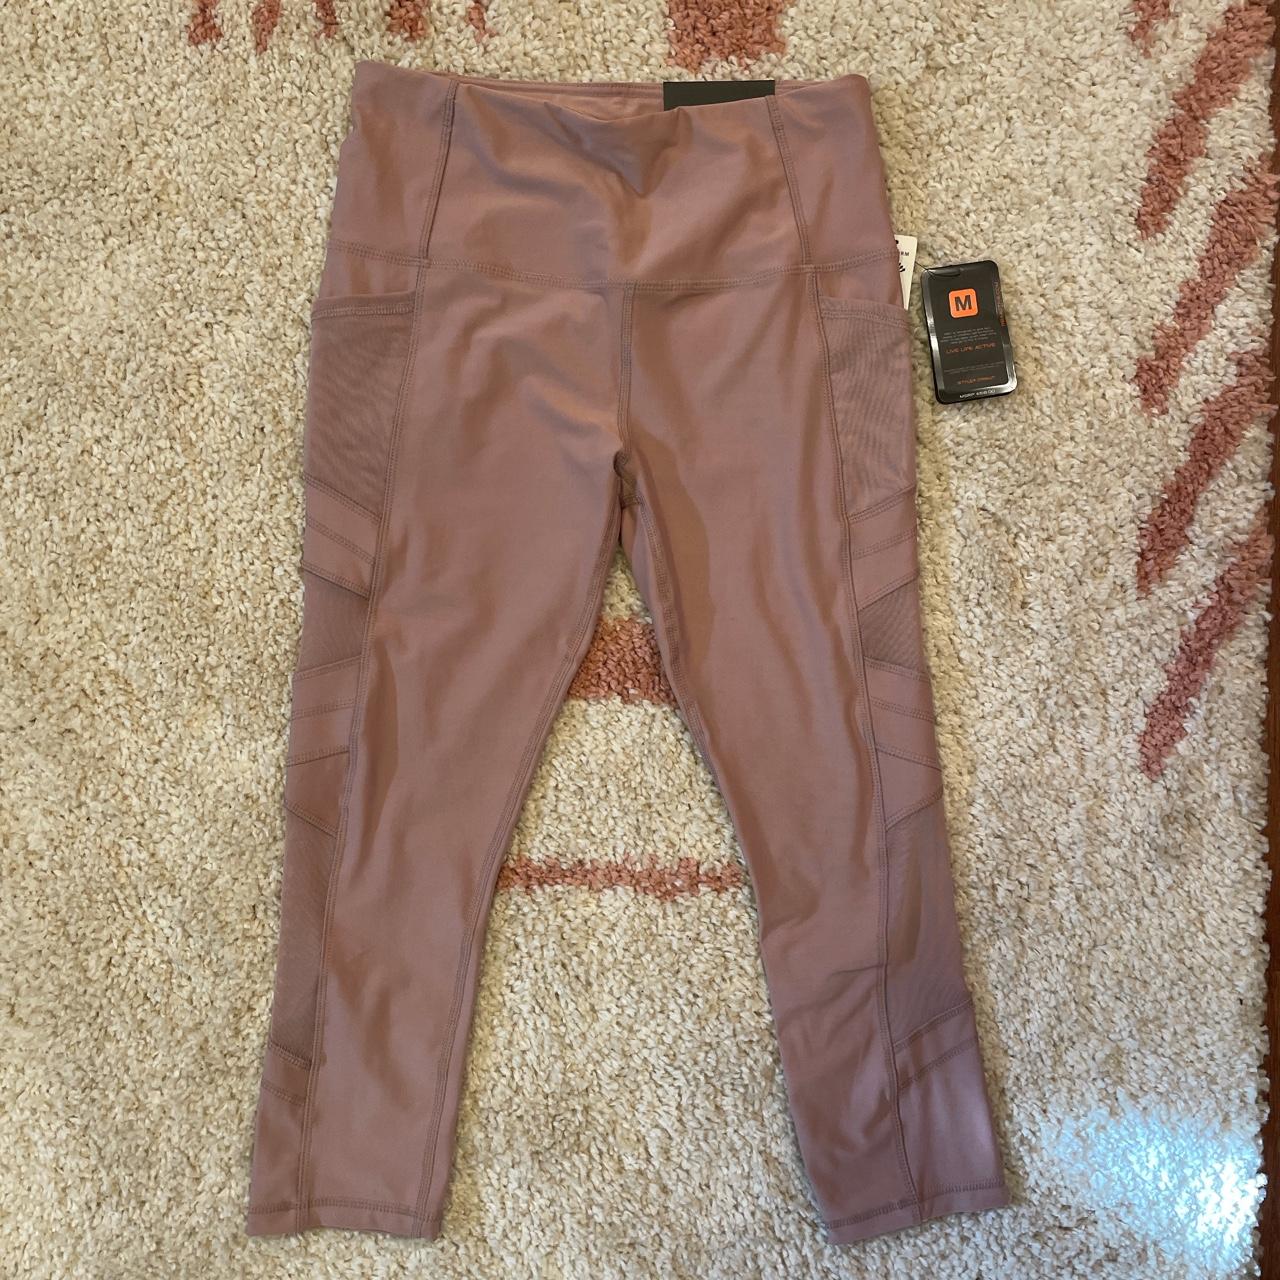 Brand new RBX active leggings in a beautiful mauve - Depop